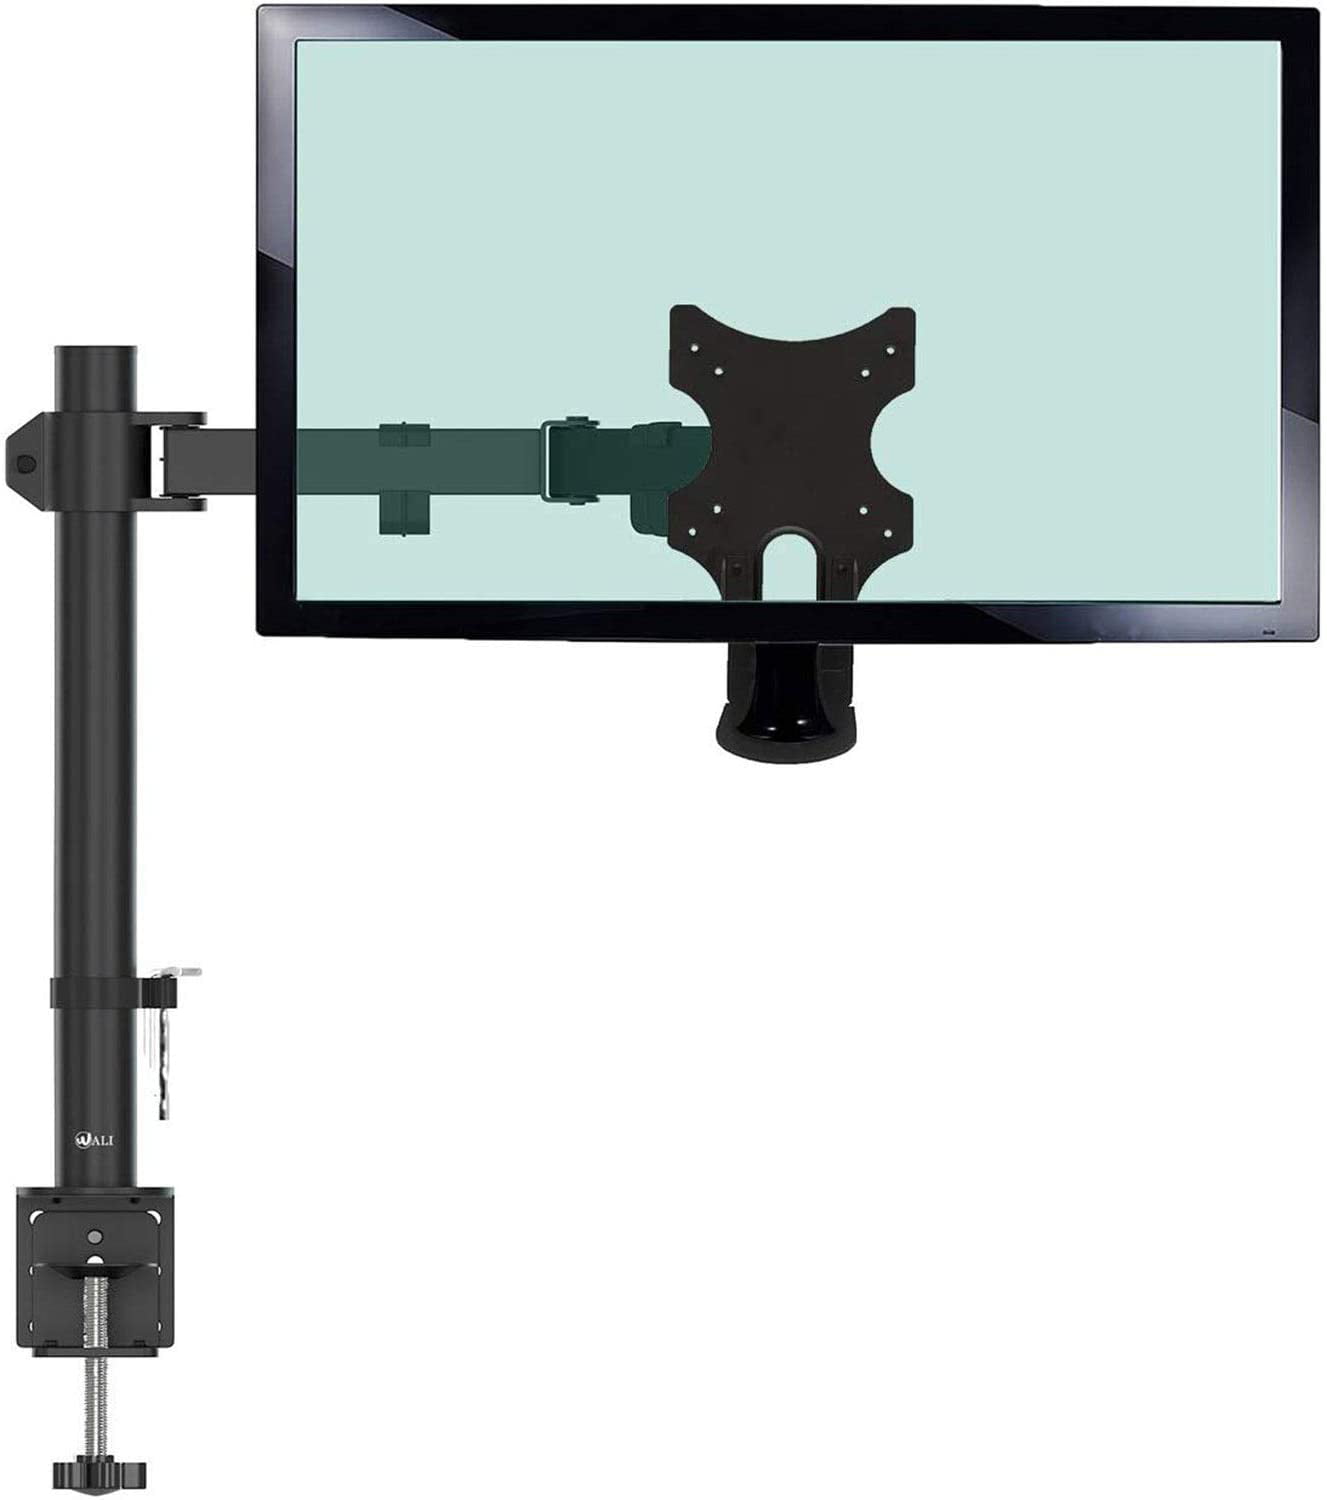 S20C300BL 1 Pack Black PX2370 S24B300EL WALI WL- VSA001 VESA Mount Adapter Bracket for Samsung Monitors S23C350H 